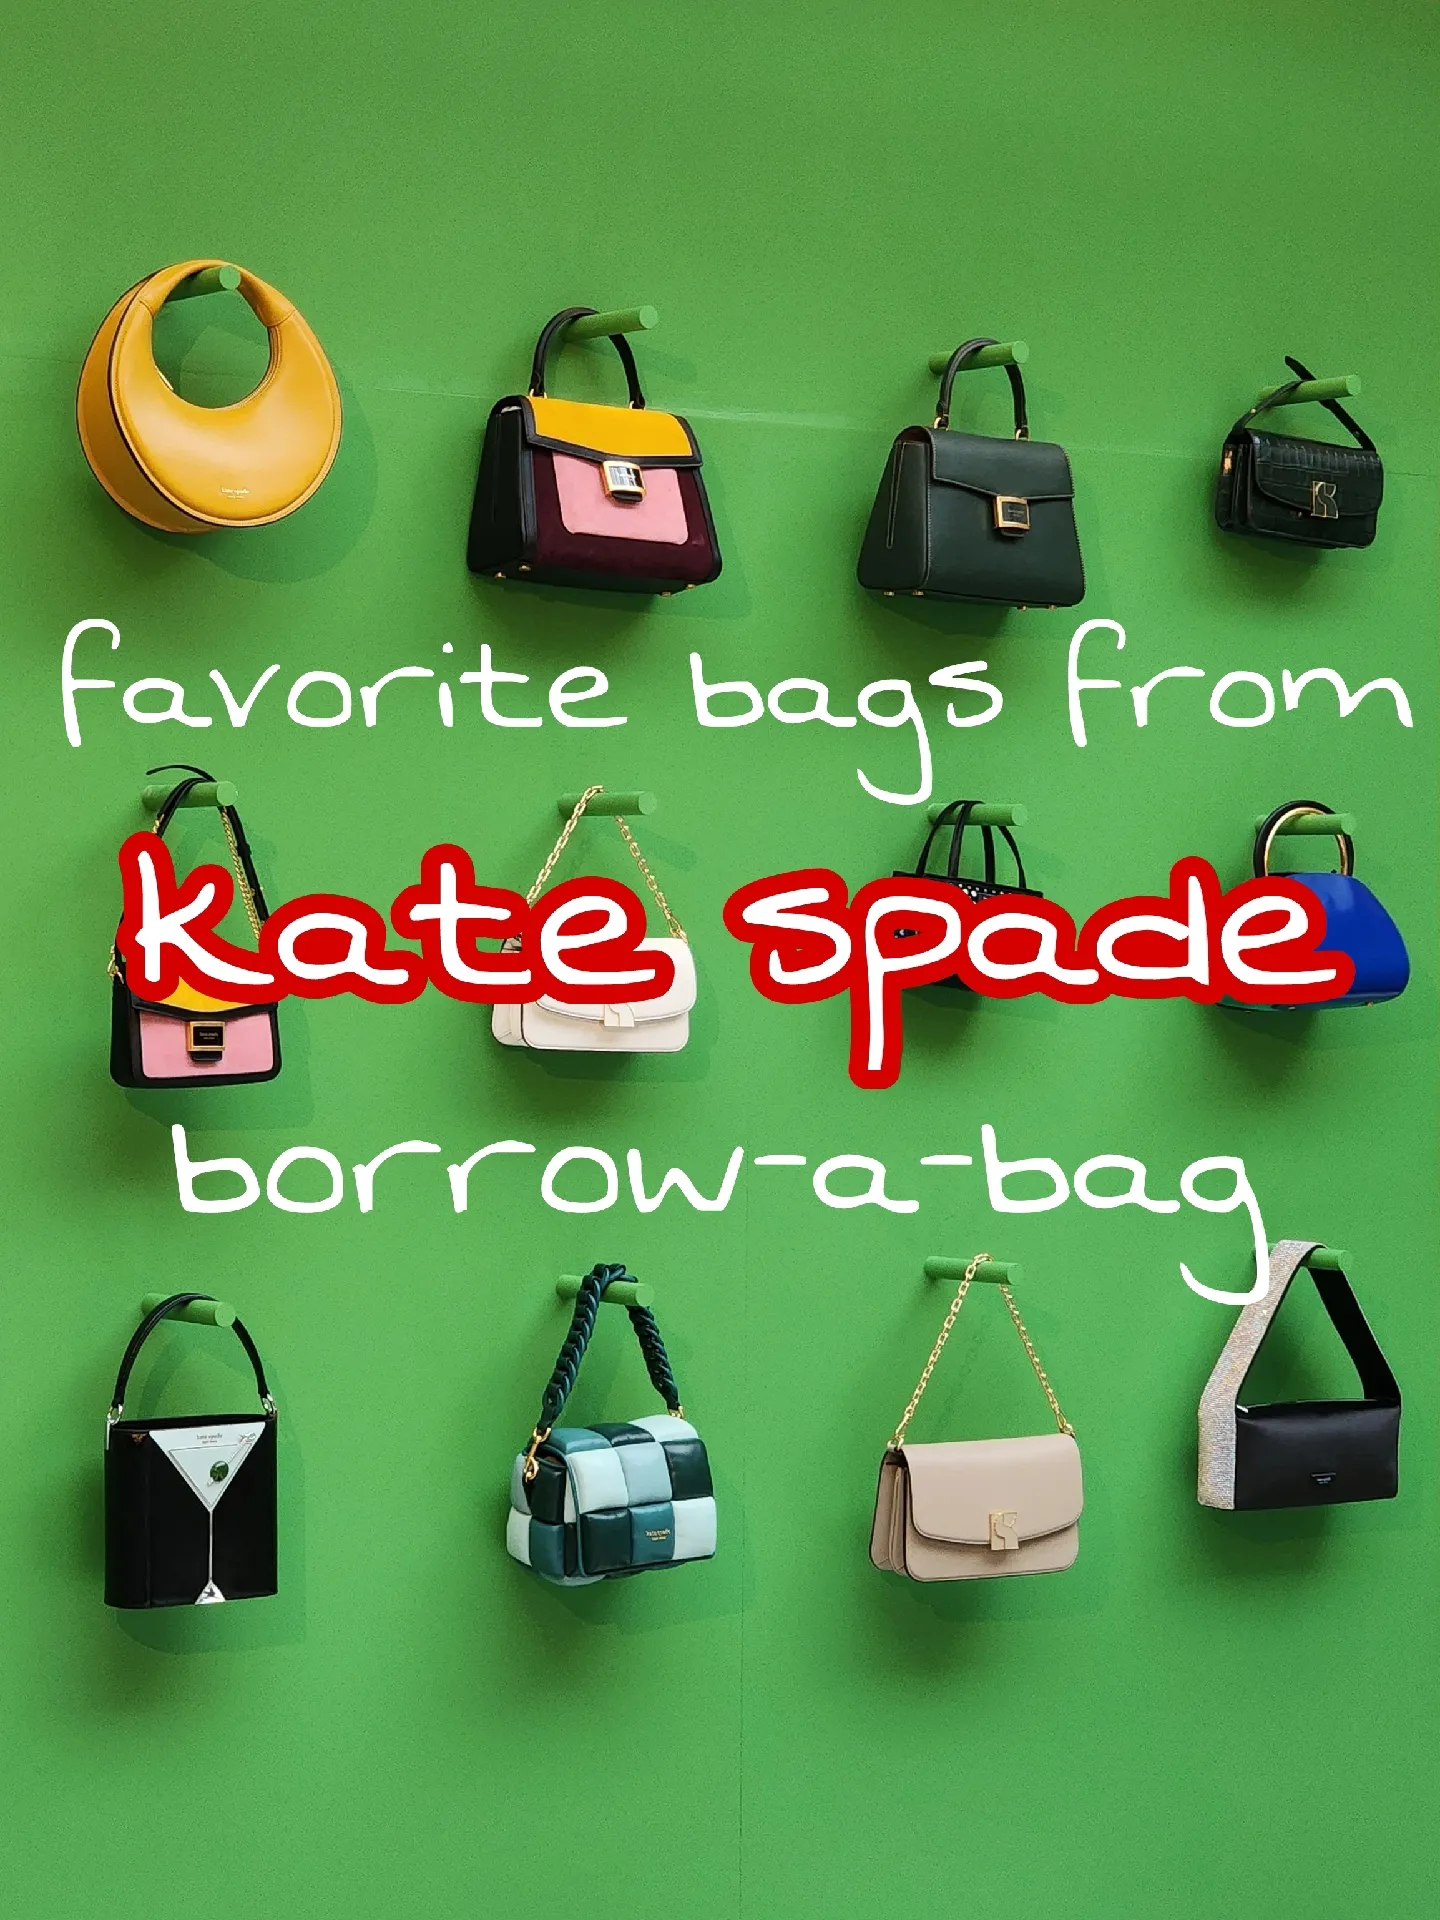 favorite bags from Kate Spade borrow-a-bag in NYC⭐ | Gallery